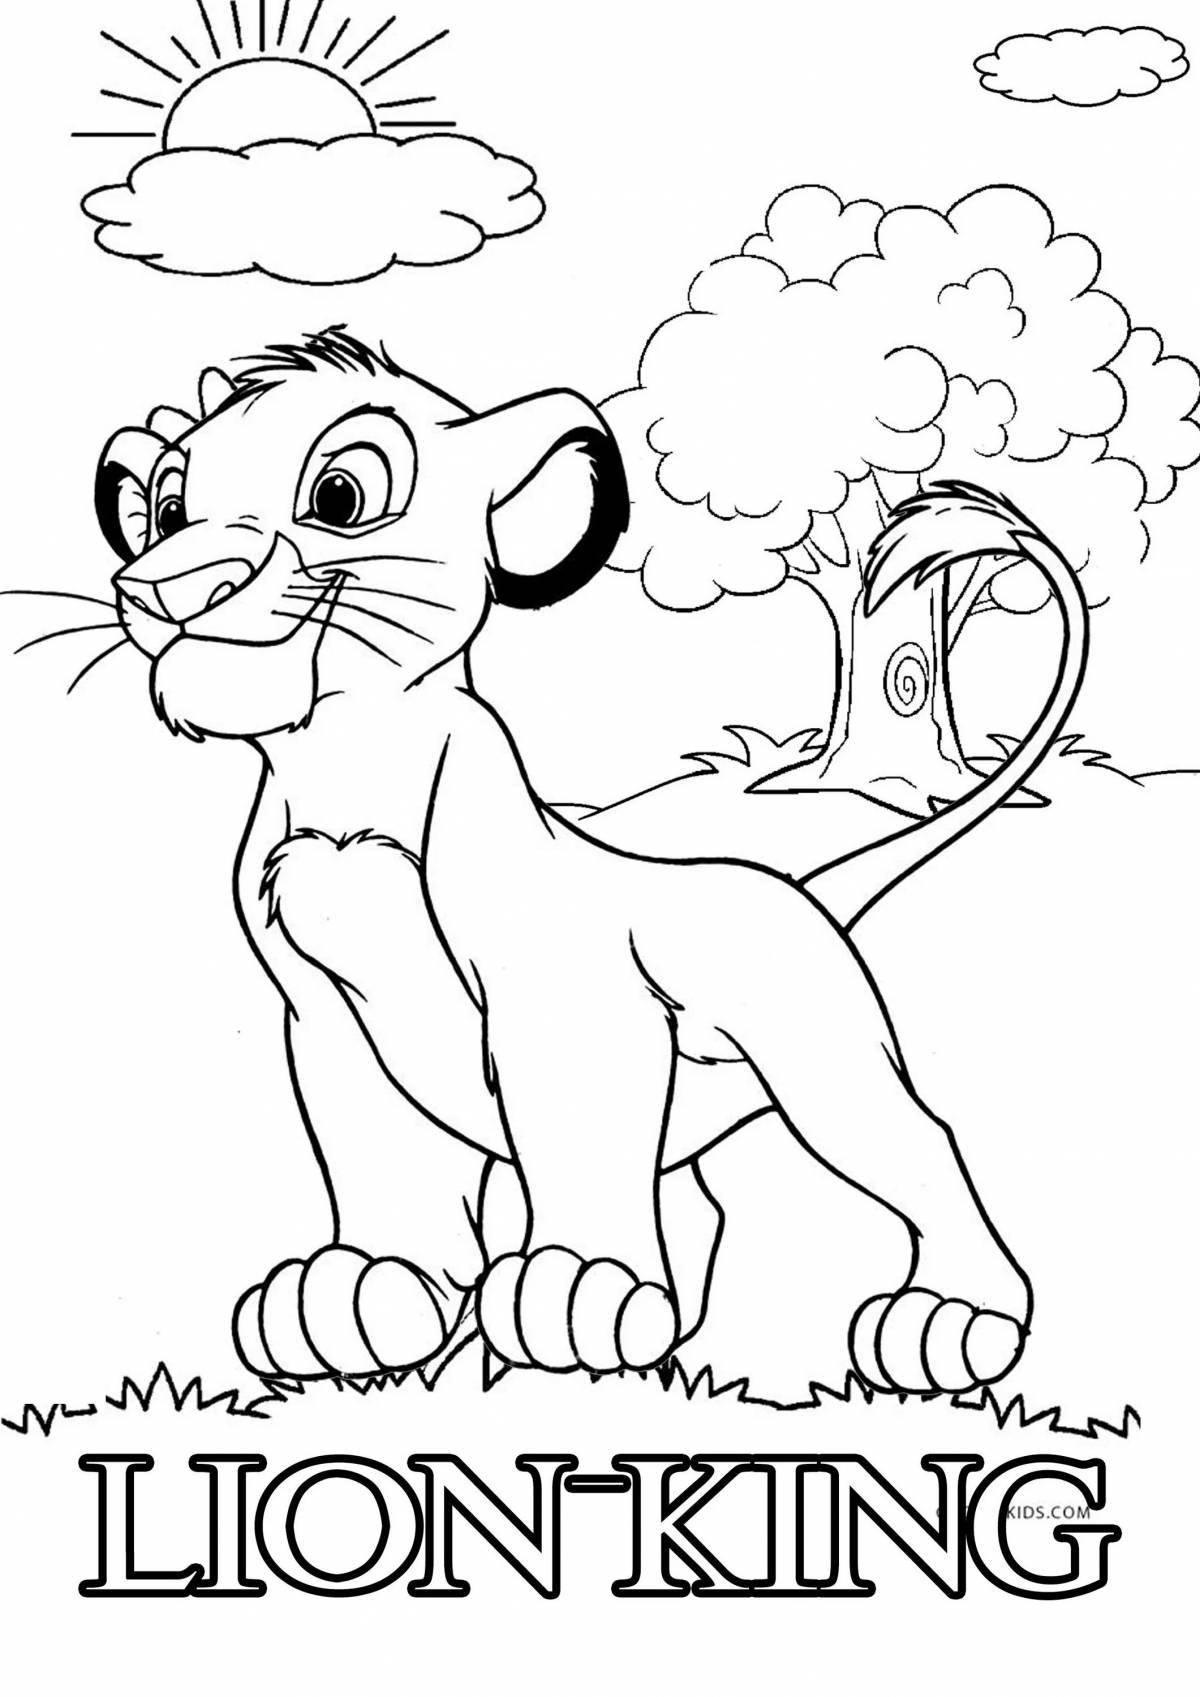 Fairy lion king coloring book for kids